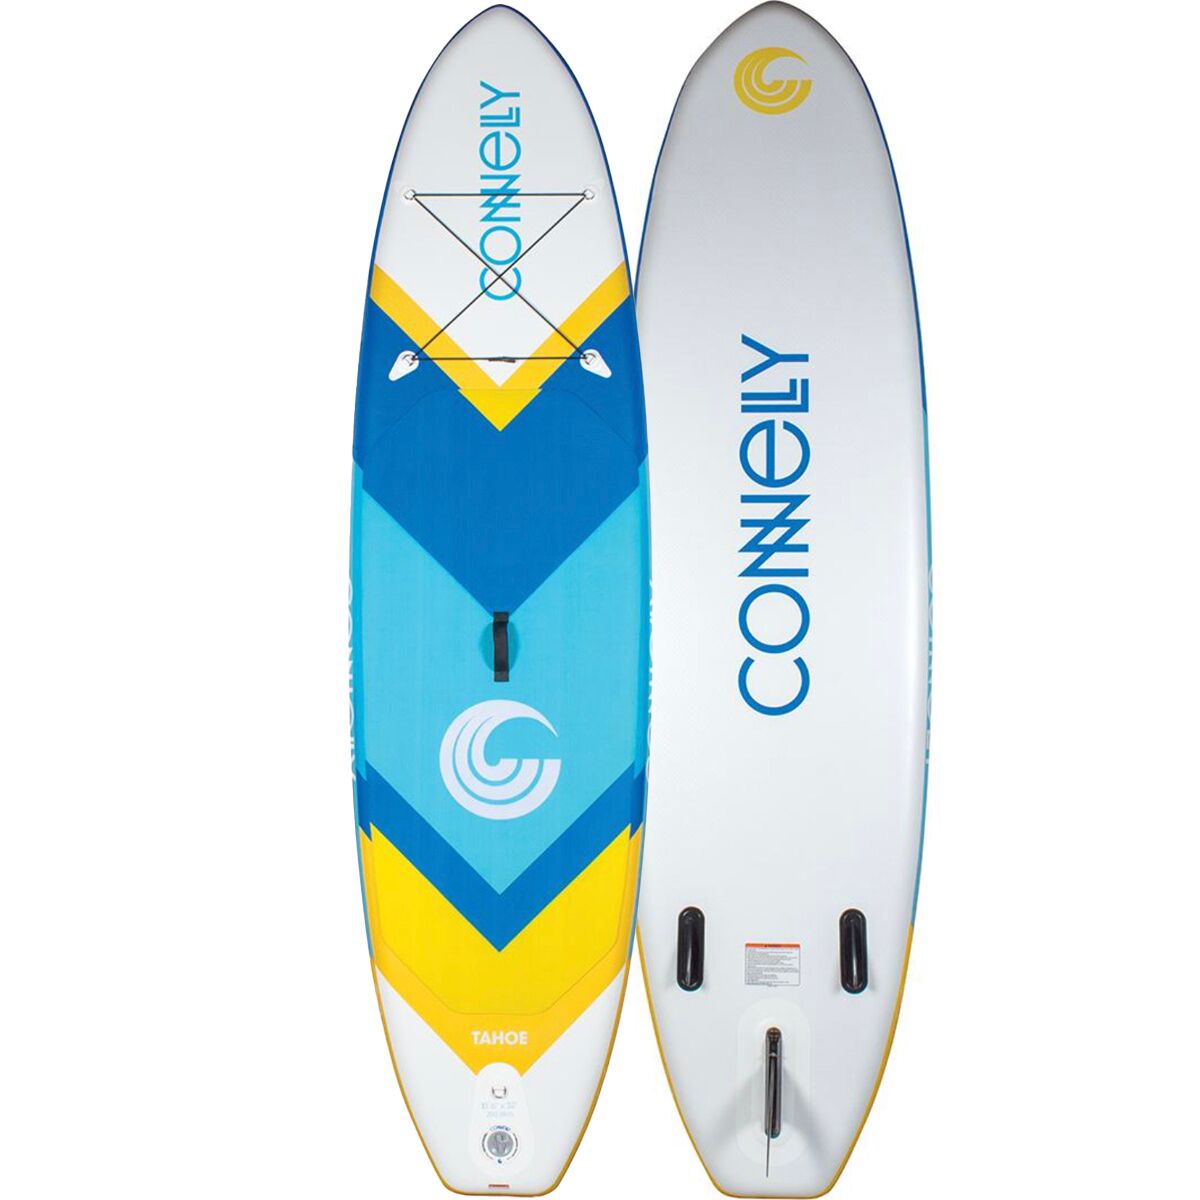 Connelly Skis Tahoe Inflatable Stand-Up Paddleboard